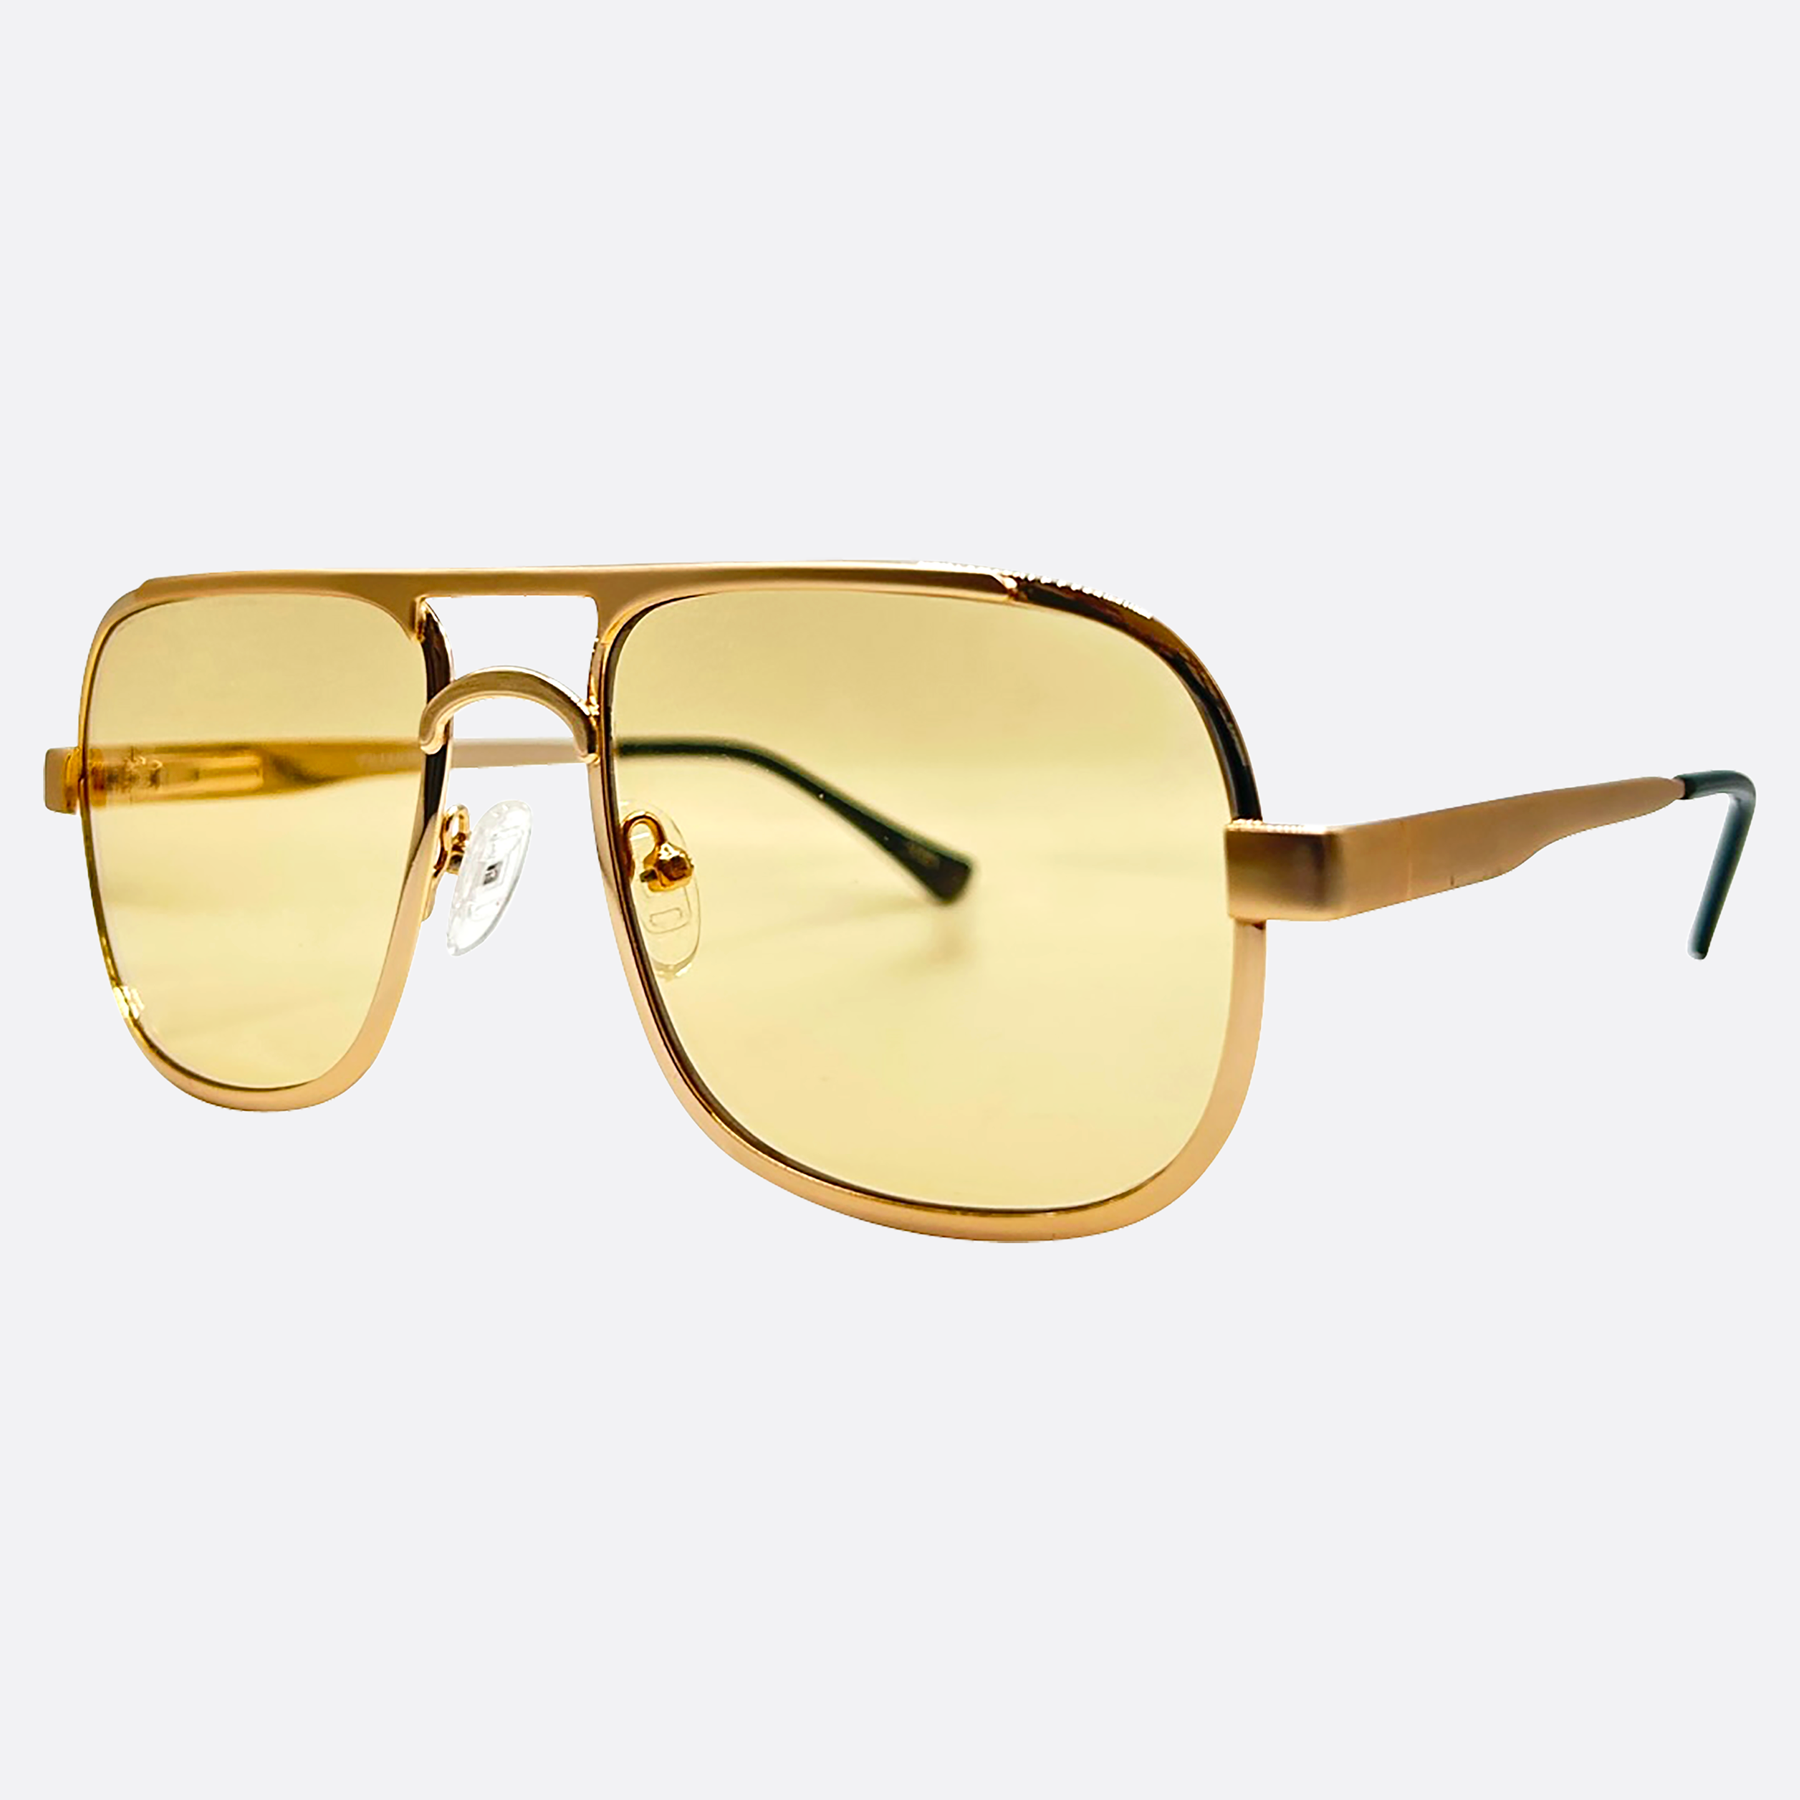 FILLMORE Gold/Tan Limited Edition Giant Vintage Original - Luxe *As Seen On: Renee Rapp*